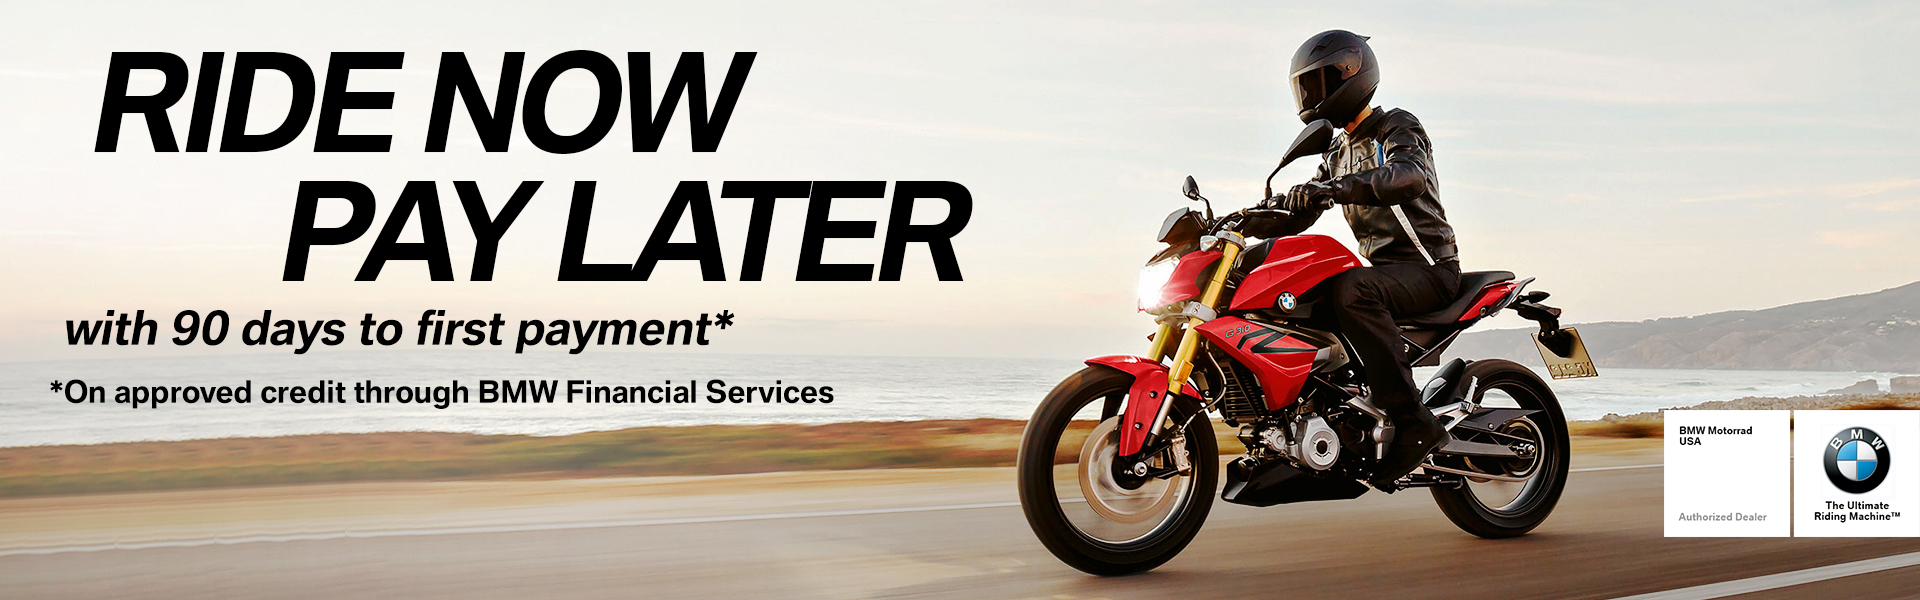 BMW Motorcycles of Concord | BMW Motorcycle Dealership | Concord, CA